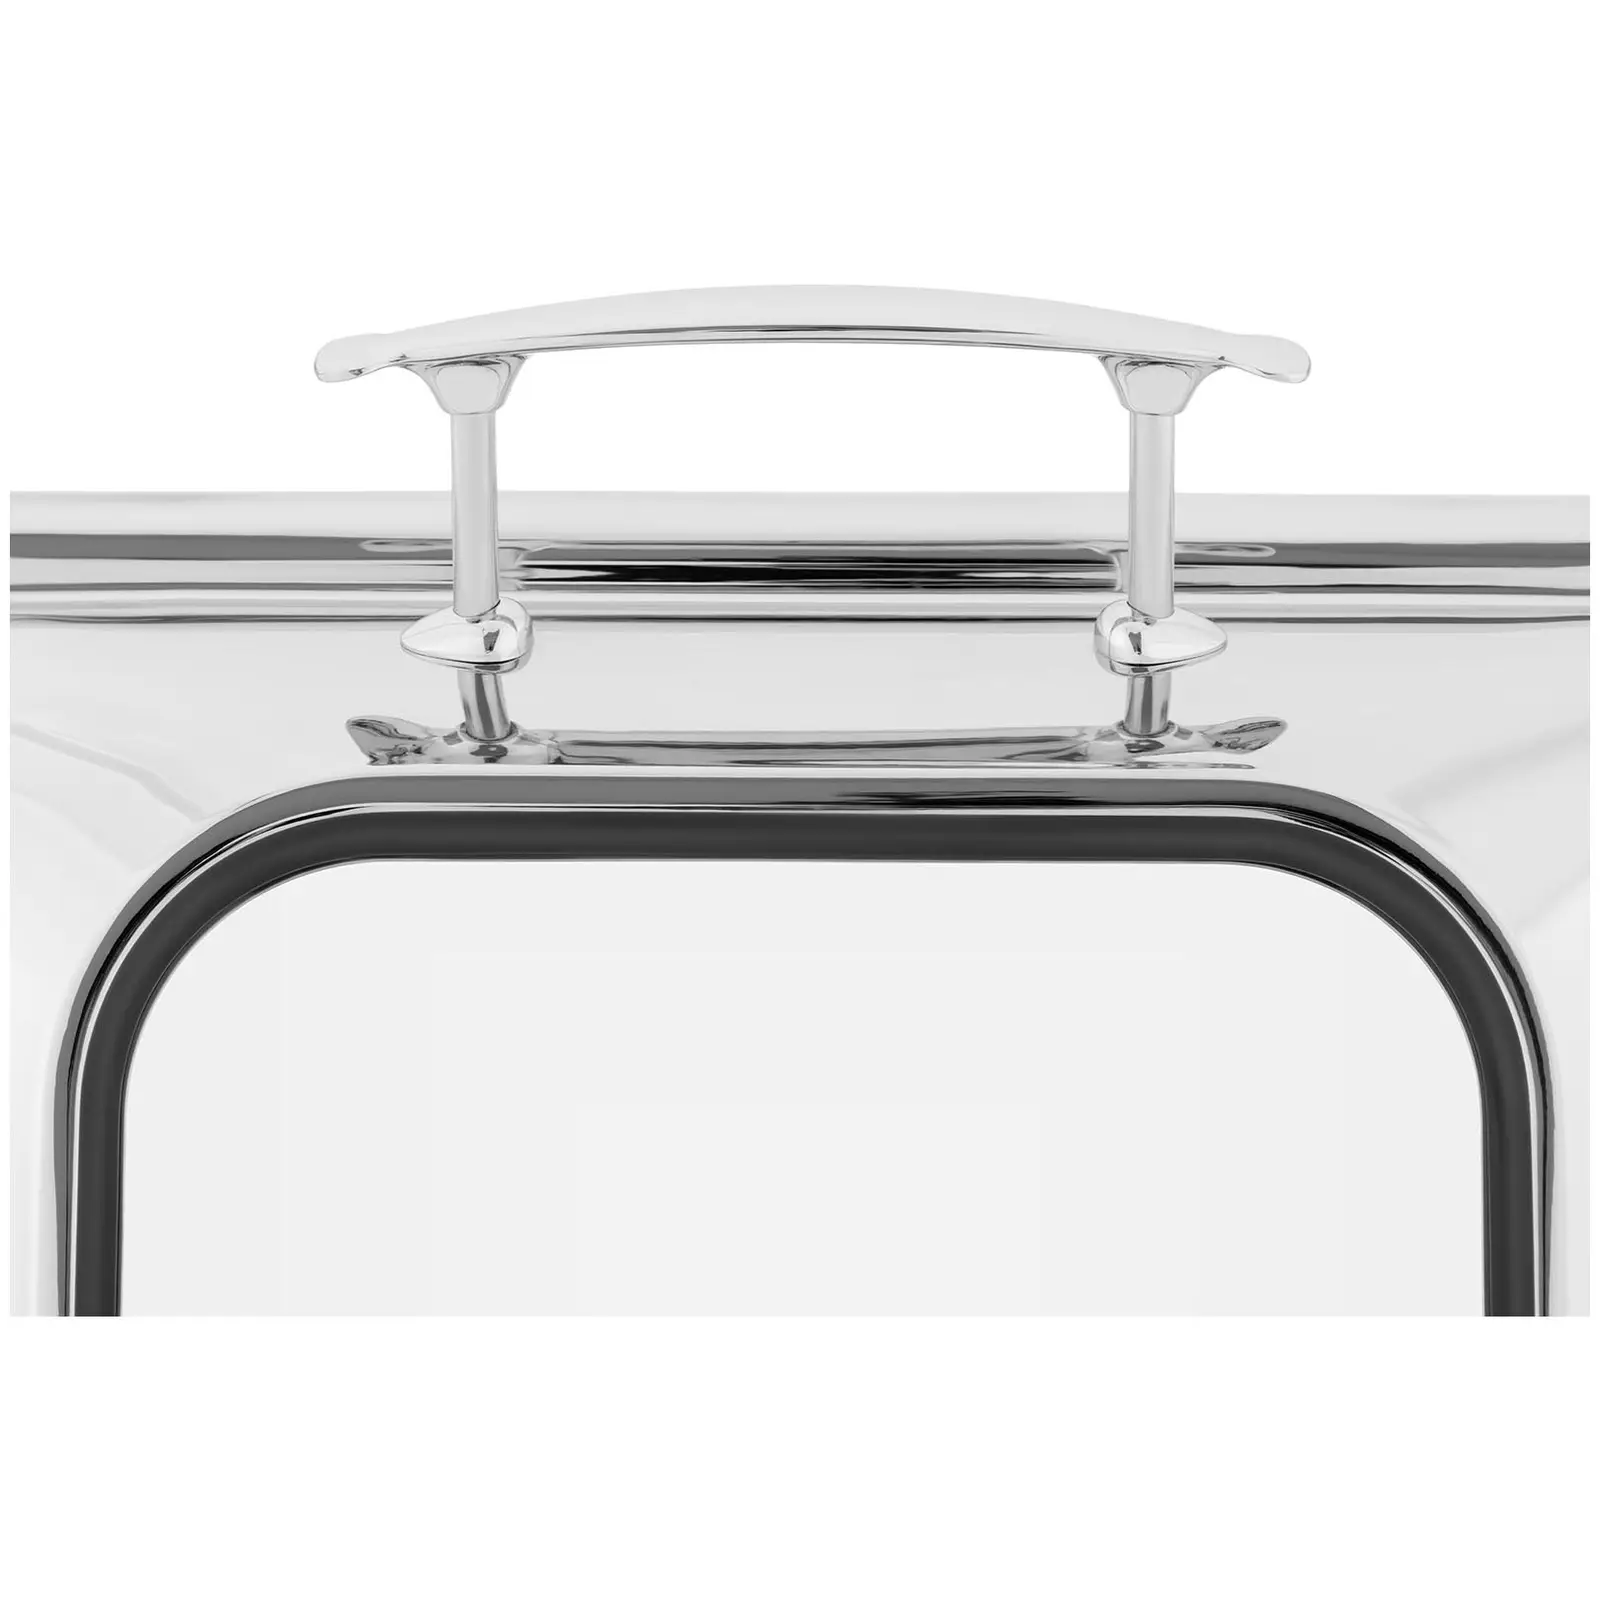 Chafing Dish - GN 2/3 - Royal Catering - 5,3 L - Sichtfenster